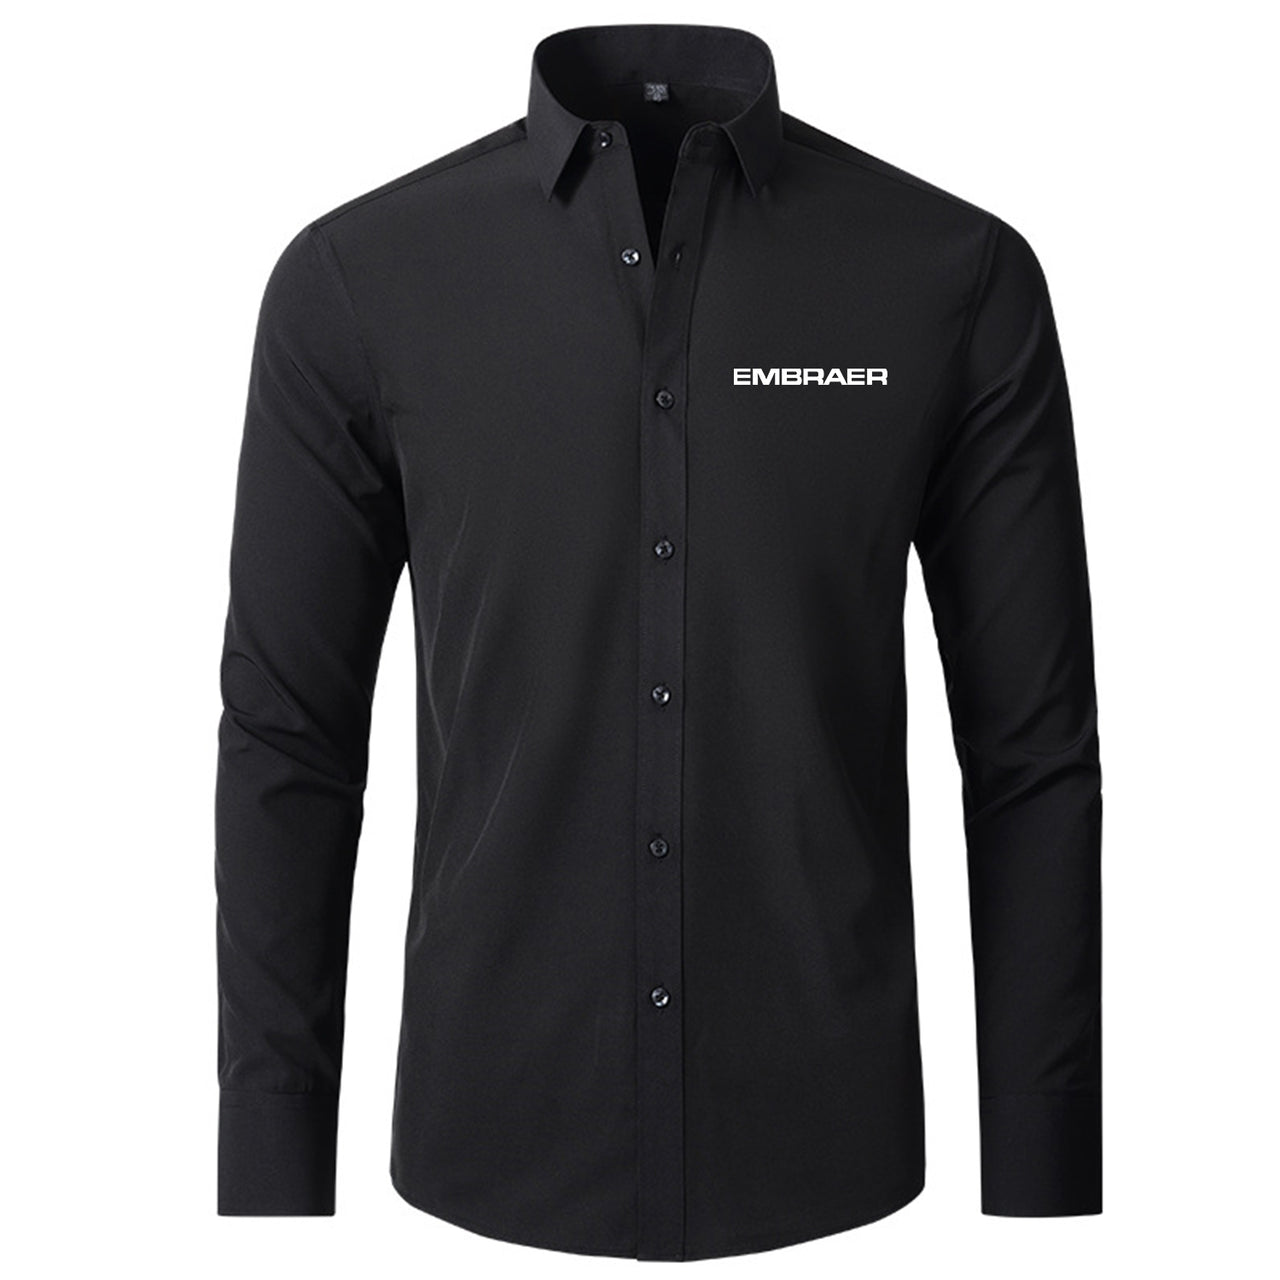 Embraer & Text Designed Long Sleeve Shirts